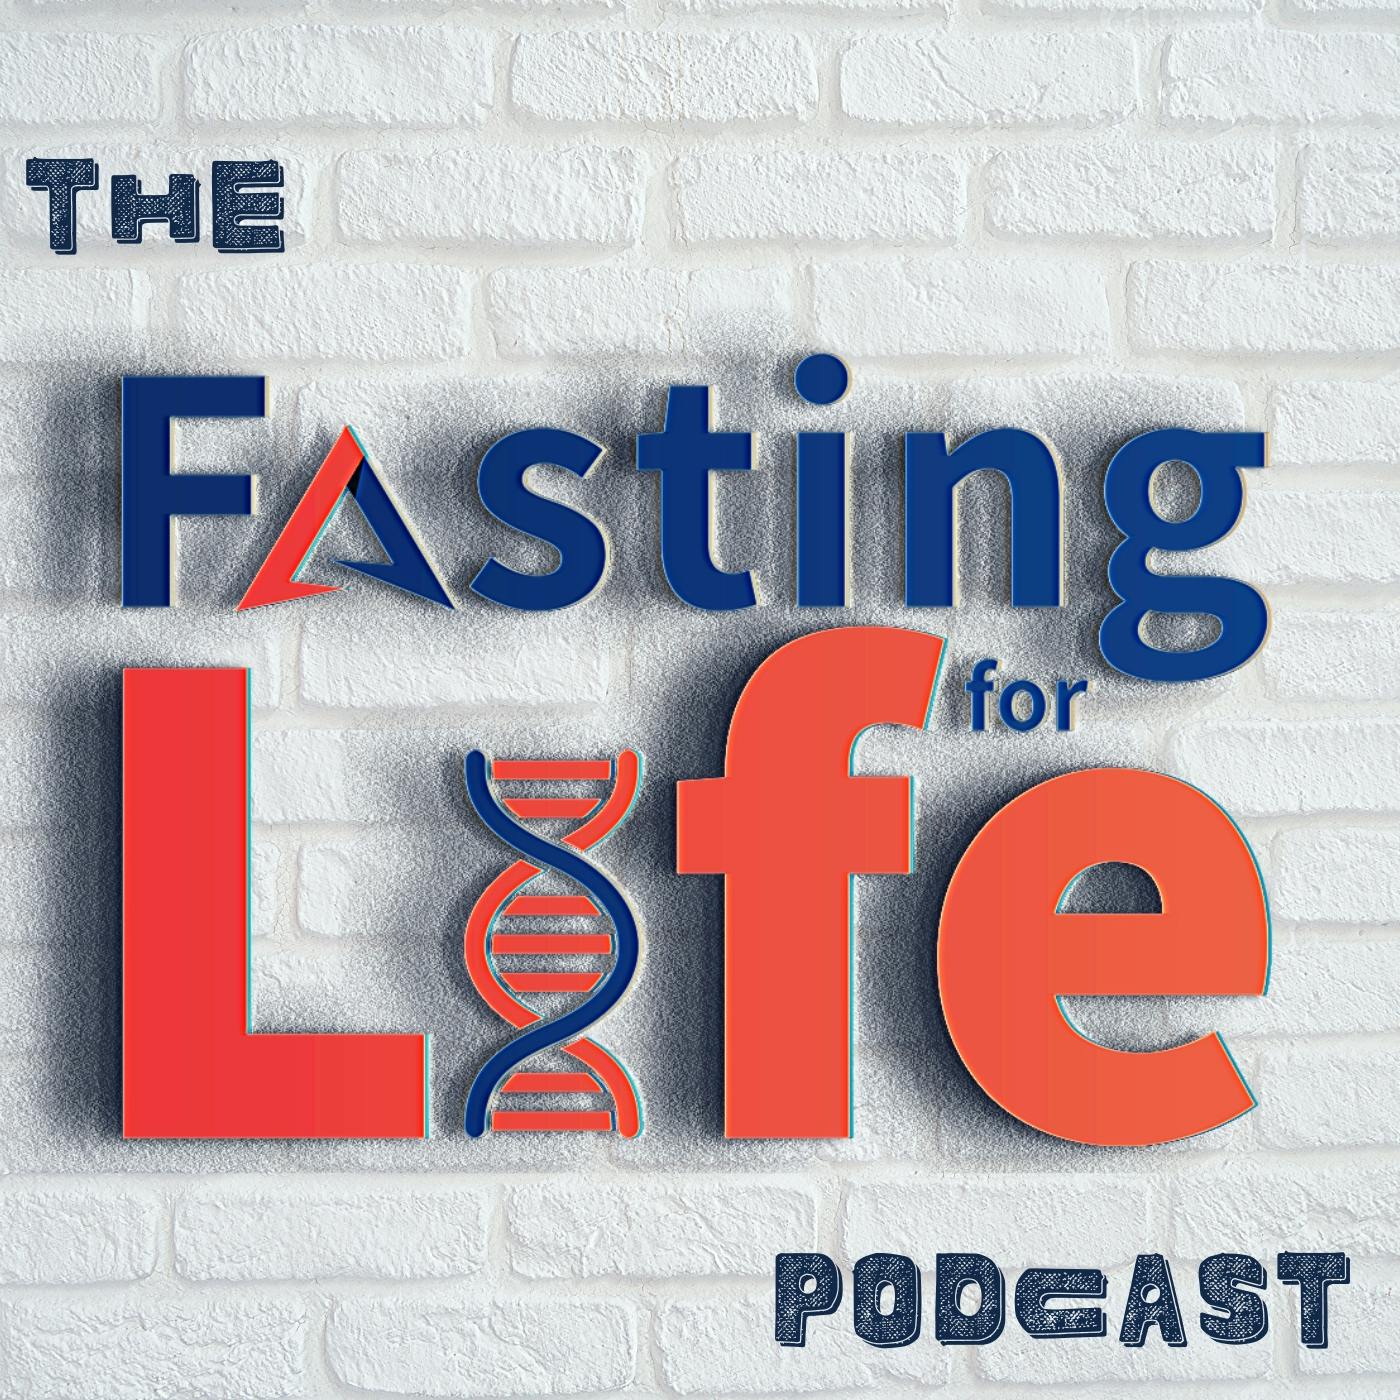 Ep. 189 - Measuring cardiovascular health & sleep quality with wearables & Whoop | Fasting schedules that improve nervous system function, heart health, & heart rate variability (HRV) | One Meal a Day